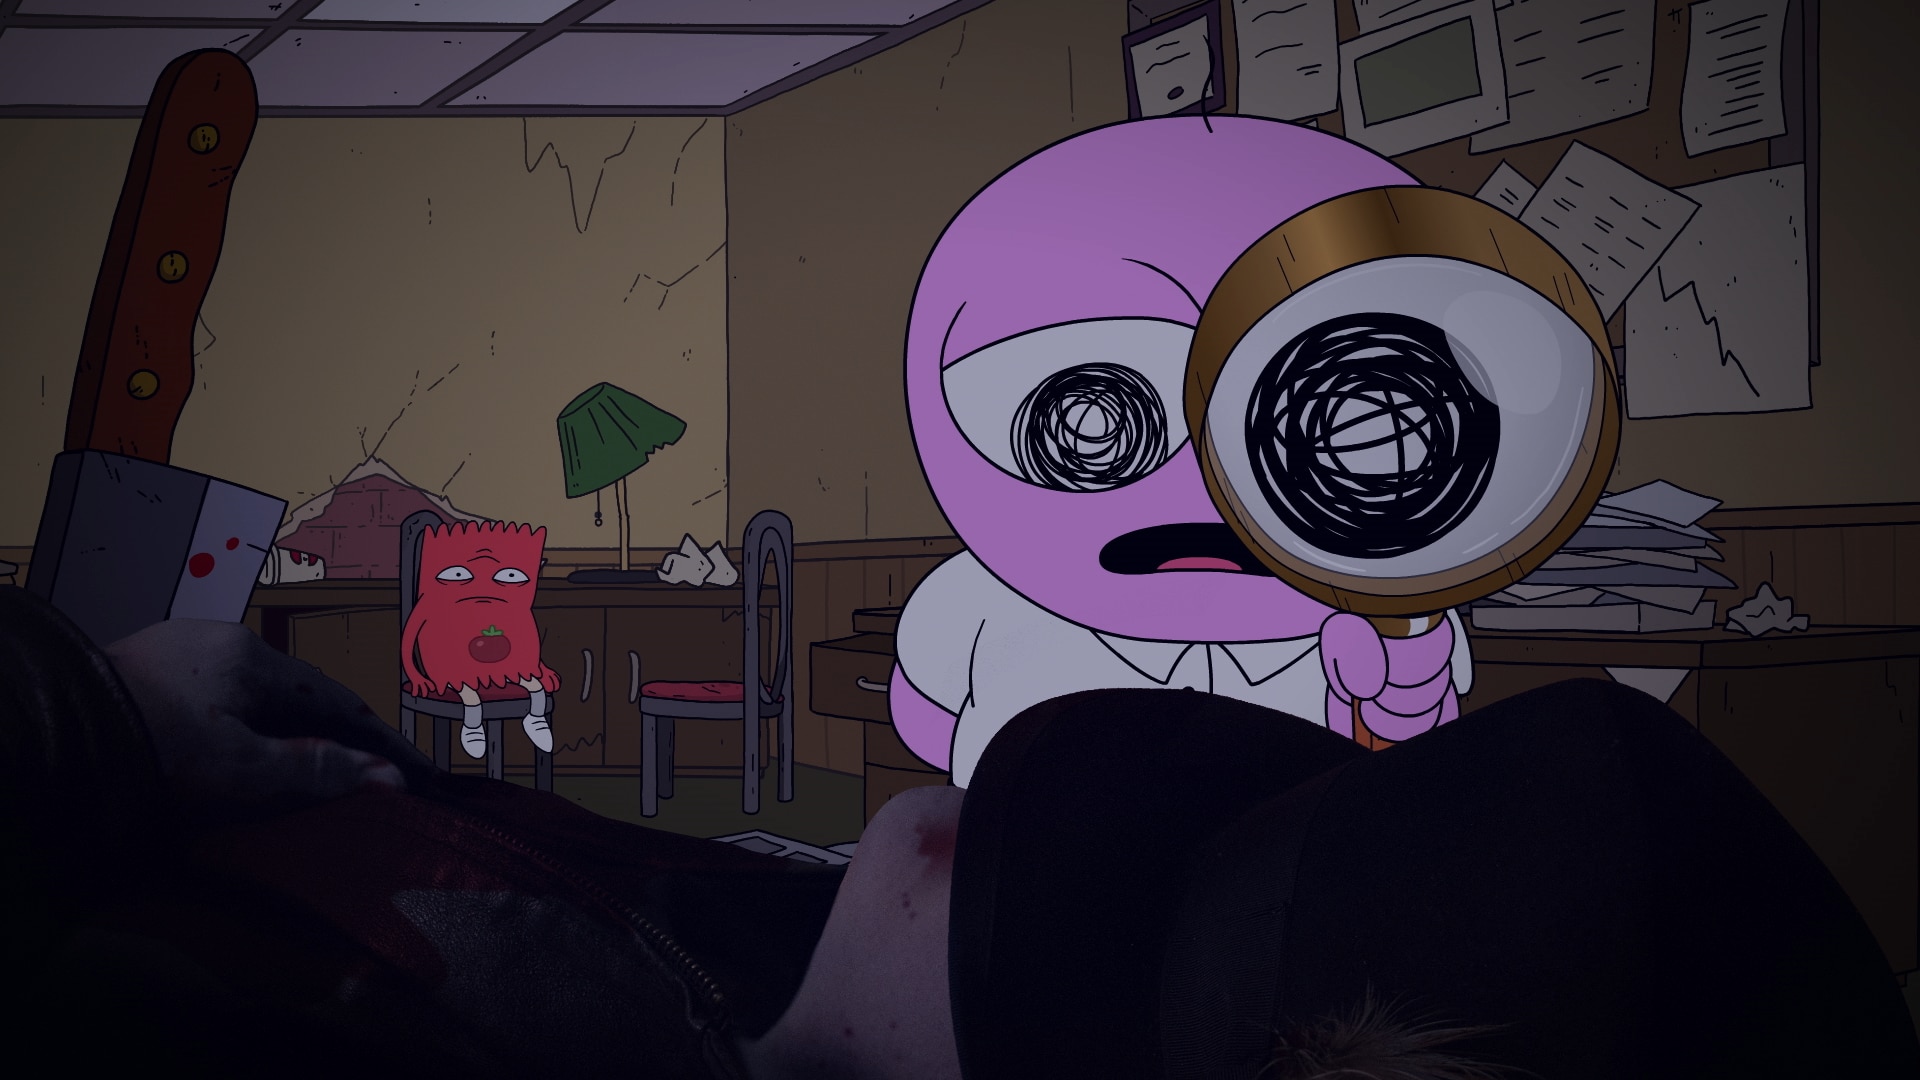 Watch Smiling Friends Episodes Free from Adult Swim